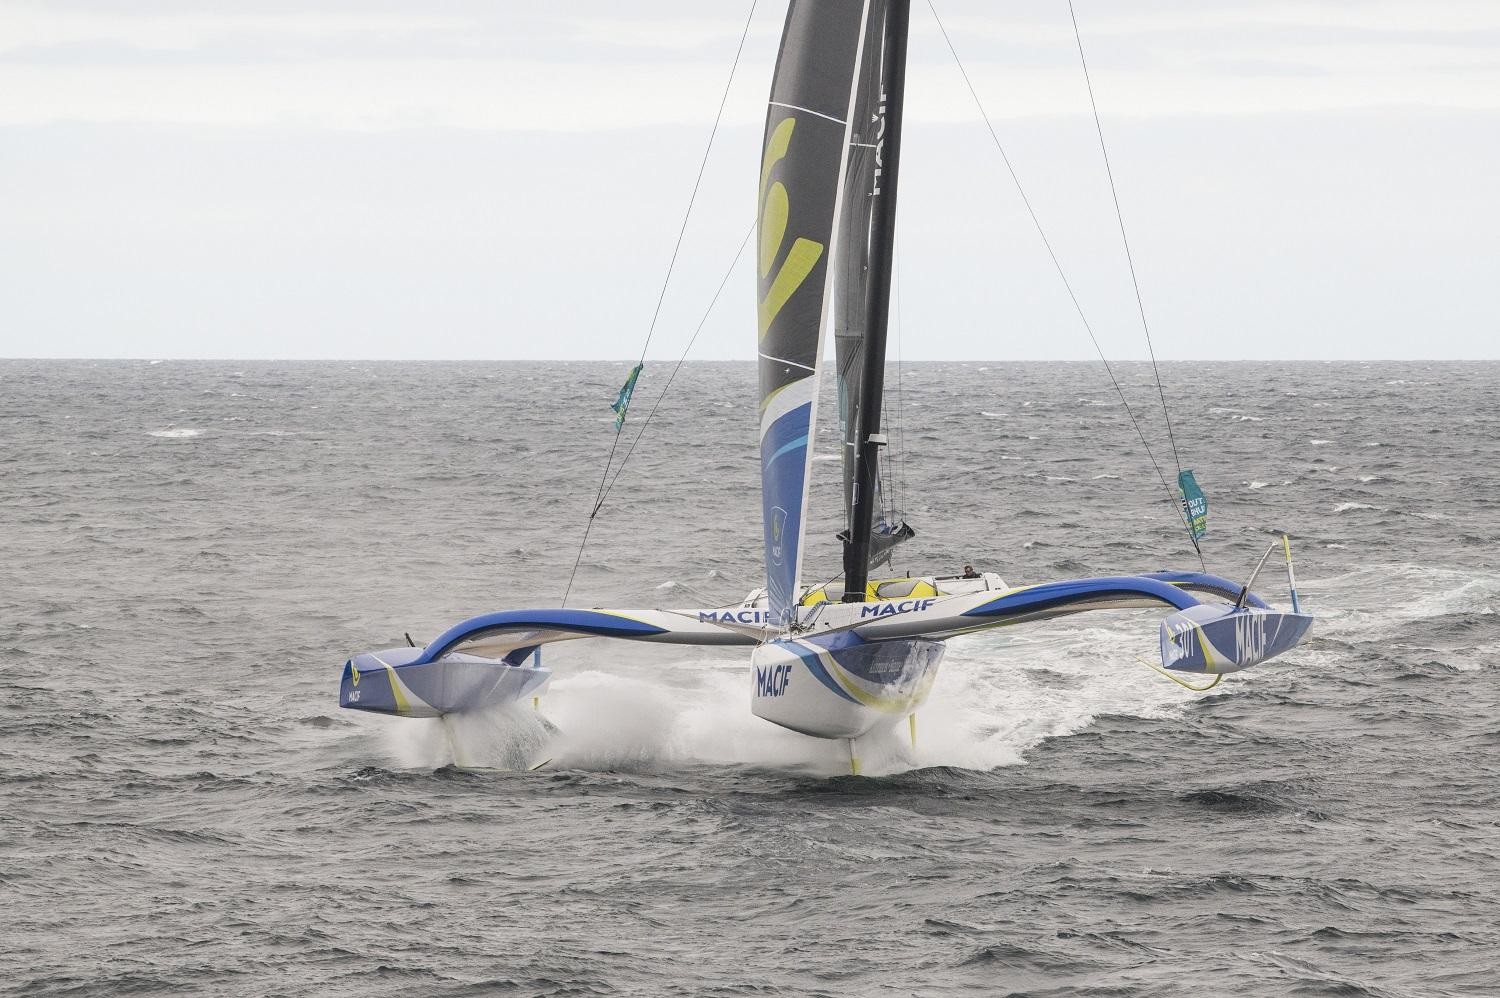 A few hours from the amazing outcome of the Route du Rhum and the fierce fight that is currently being played out between François Gabart and Francis Joyon.